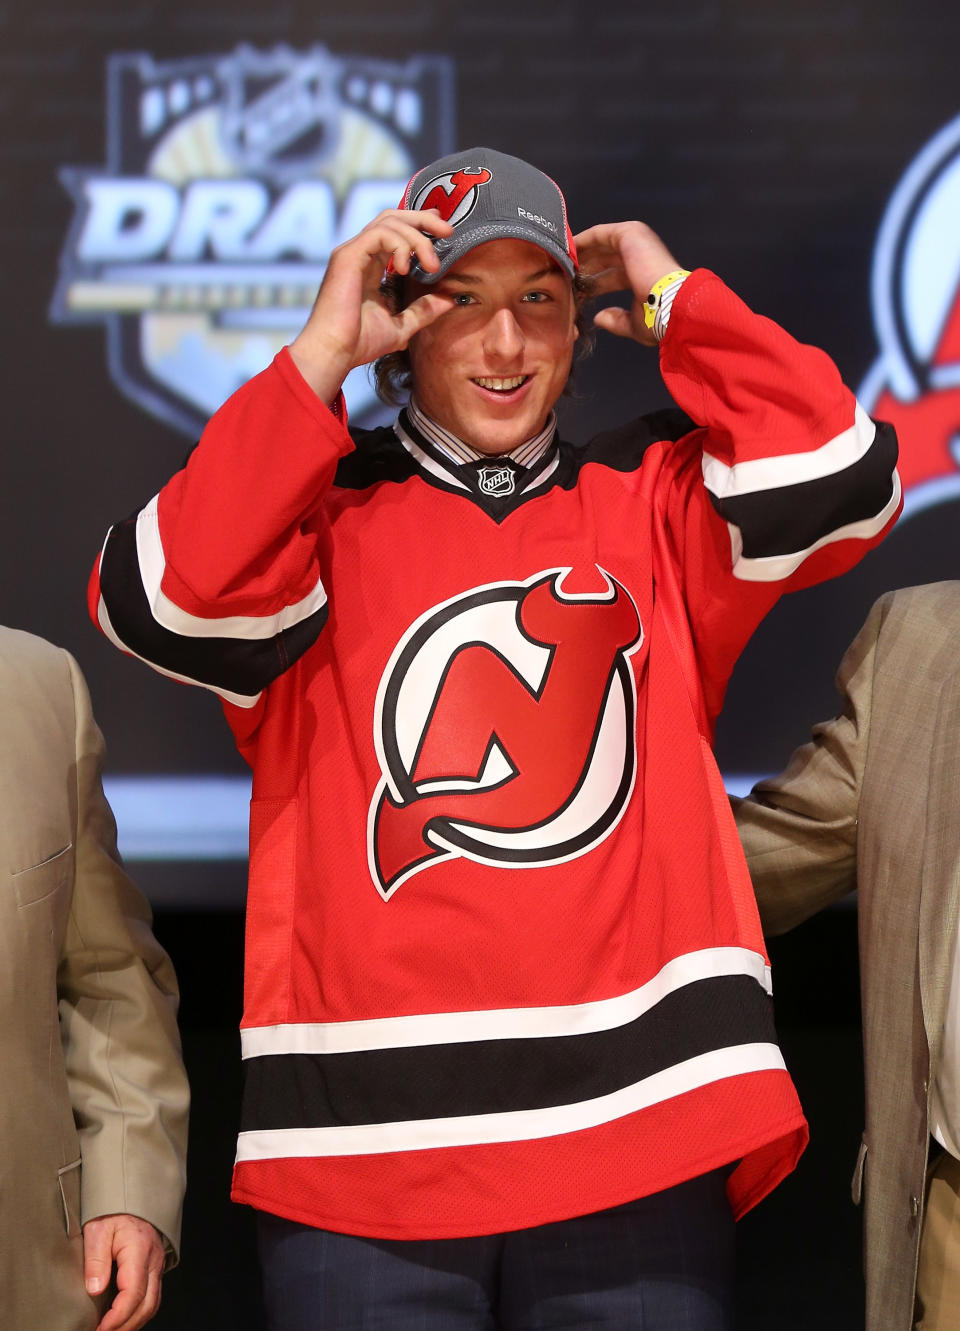 PITTSBURGH, PA - JUNE 22: Stefan Matteau, 29th overall pick by the New Jersey Devils, puts on a hat on stage during Round One of the 2012 NHL Entry Draft at Consol Energy Center on June 22, 2012 in Pittsburgh, Pennsylvania. (Photo by Bruce Bennett/Getty Images)